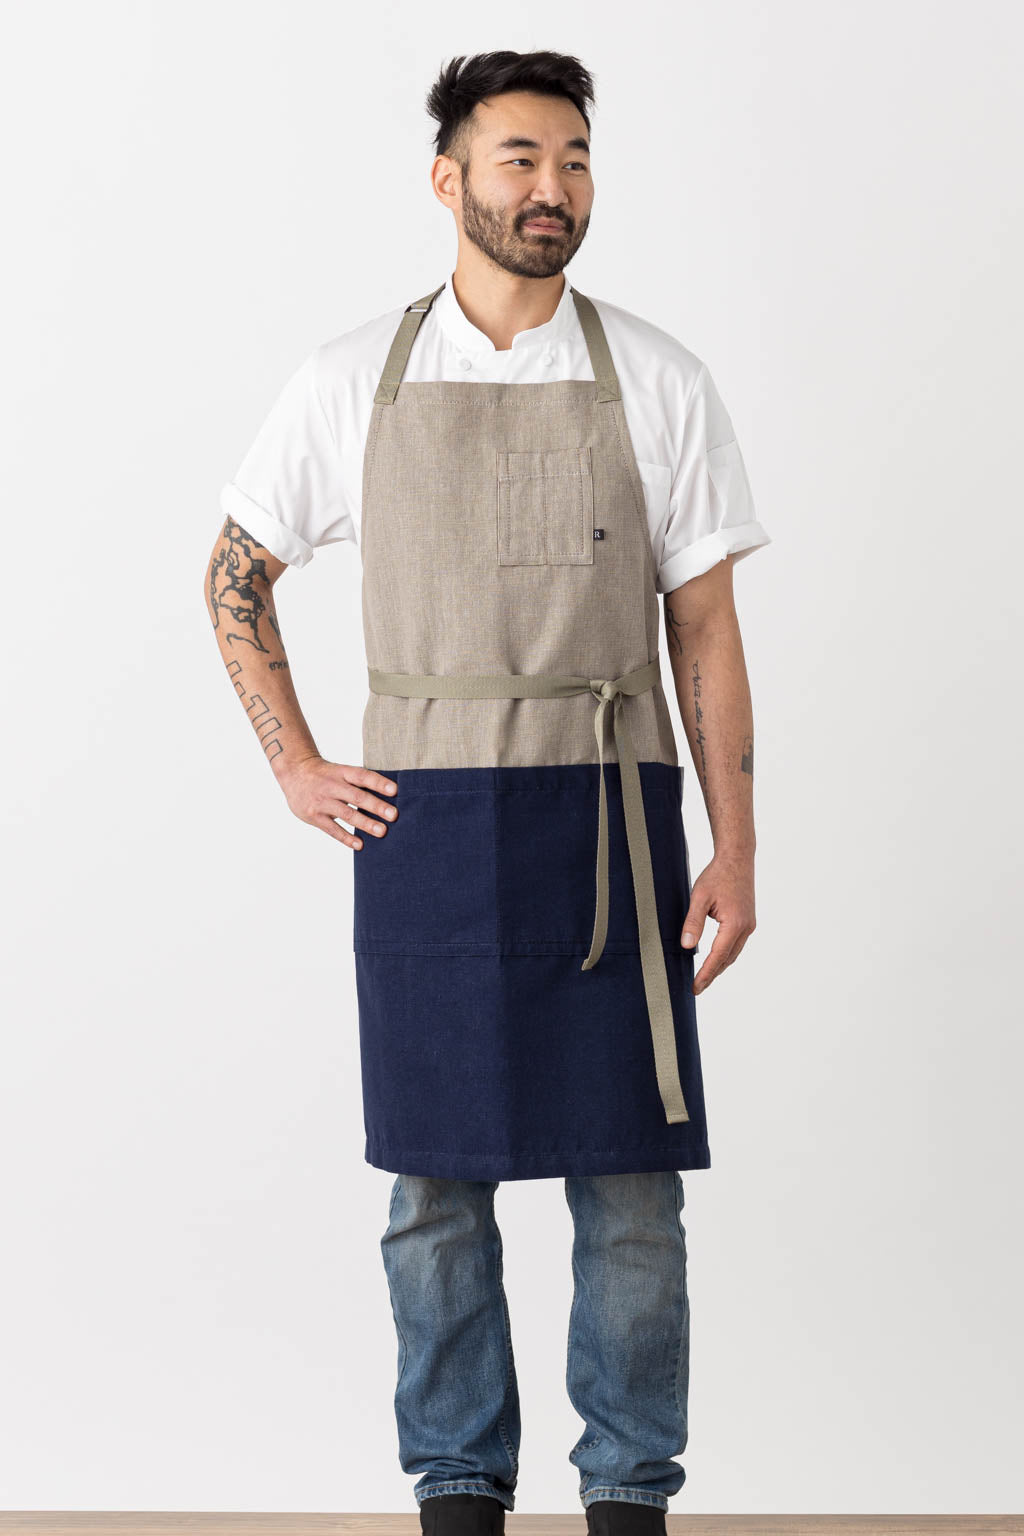 Modern Chef Apron Two Tone, Navy Blue and Tan, Restaurant Classic Bib, Industry Pricing, Cool Hip, Men, Women